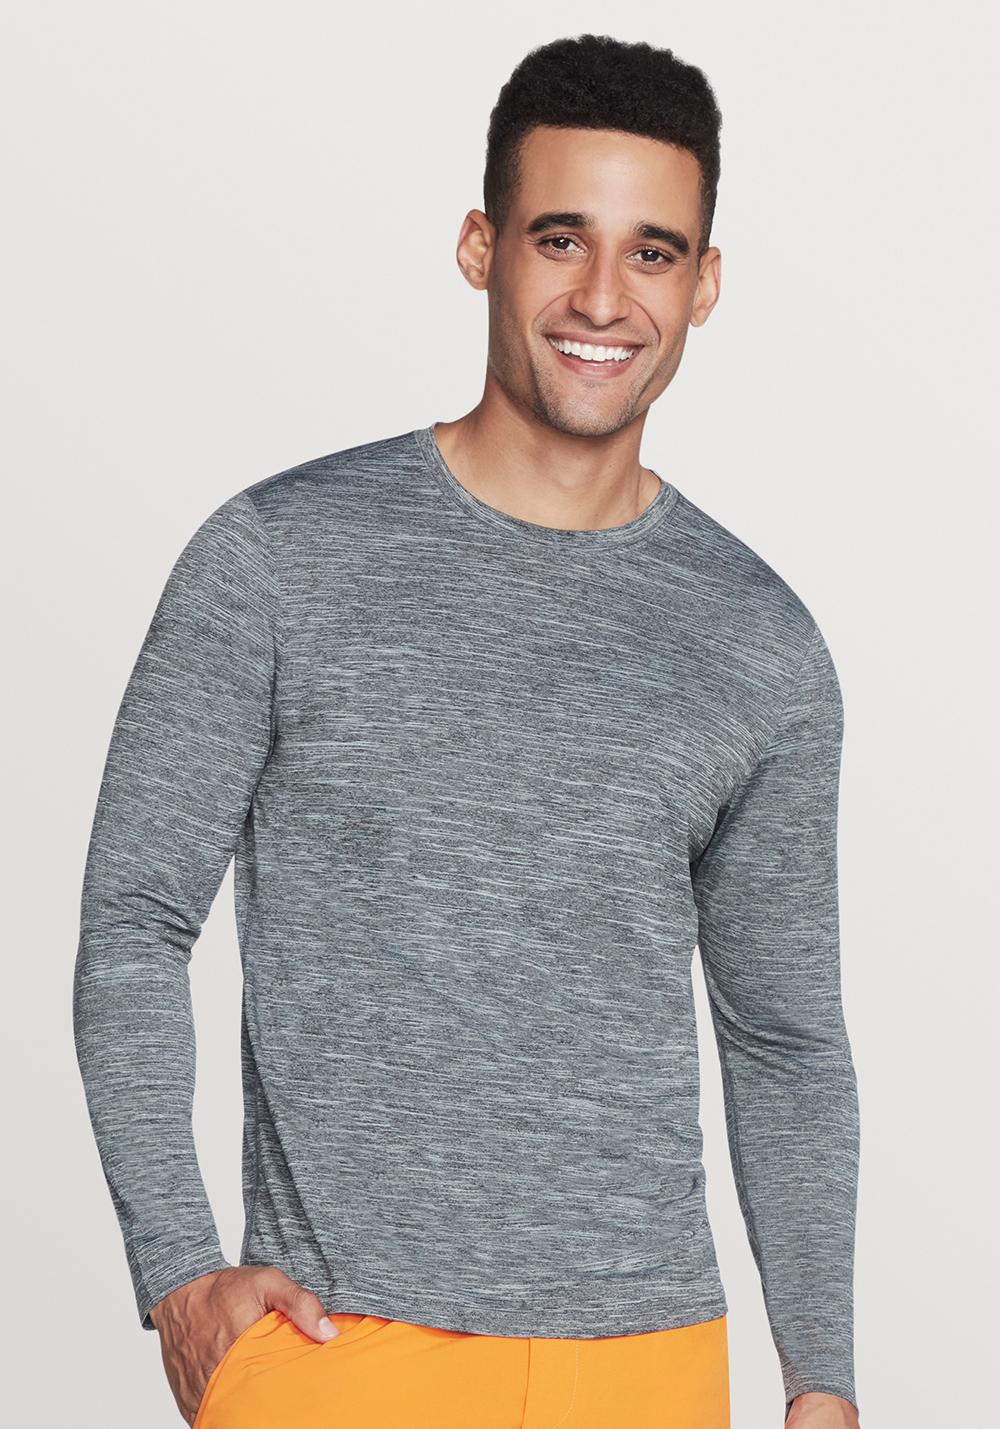 Grey On Long Road T-Shirt Sleeve The Skechers Mens